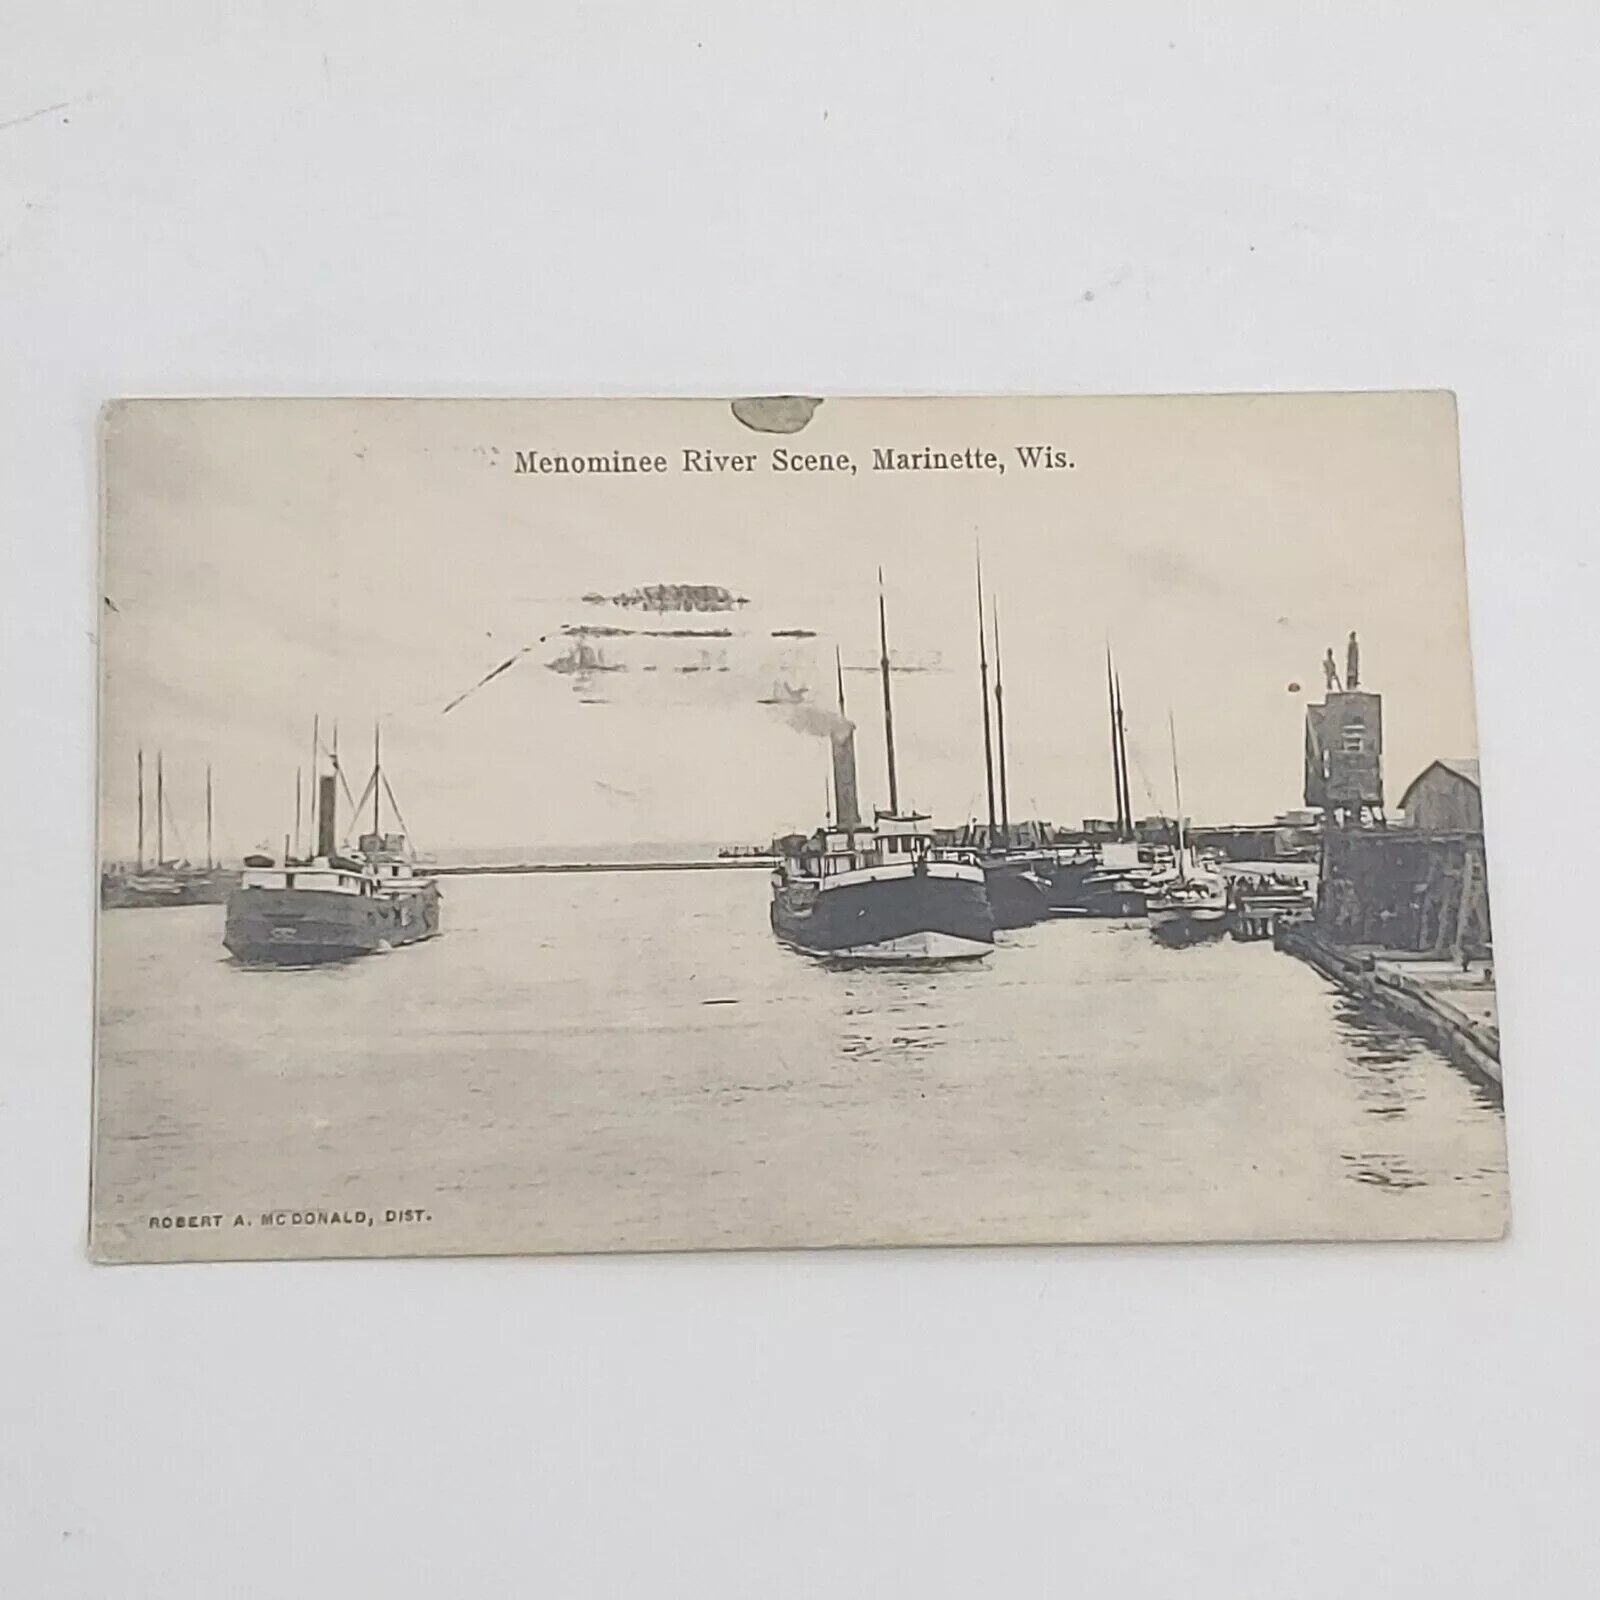 Minominee River Scene With Ships Vintage Postcard Marinette WI. 1911